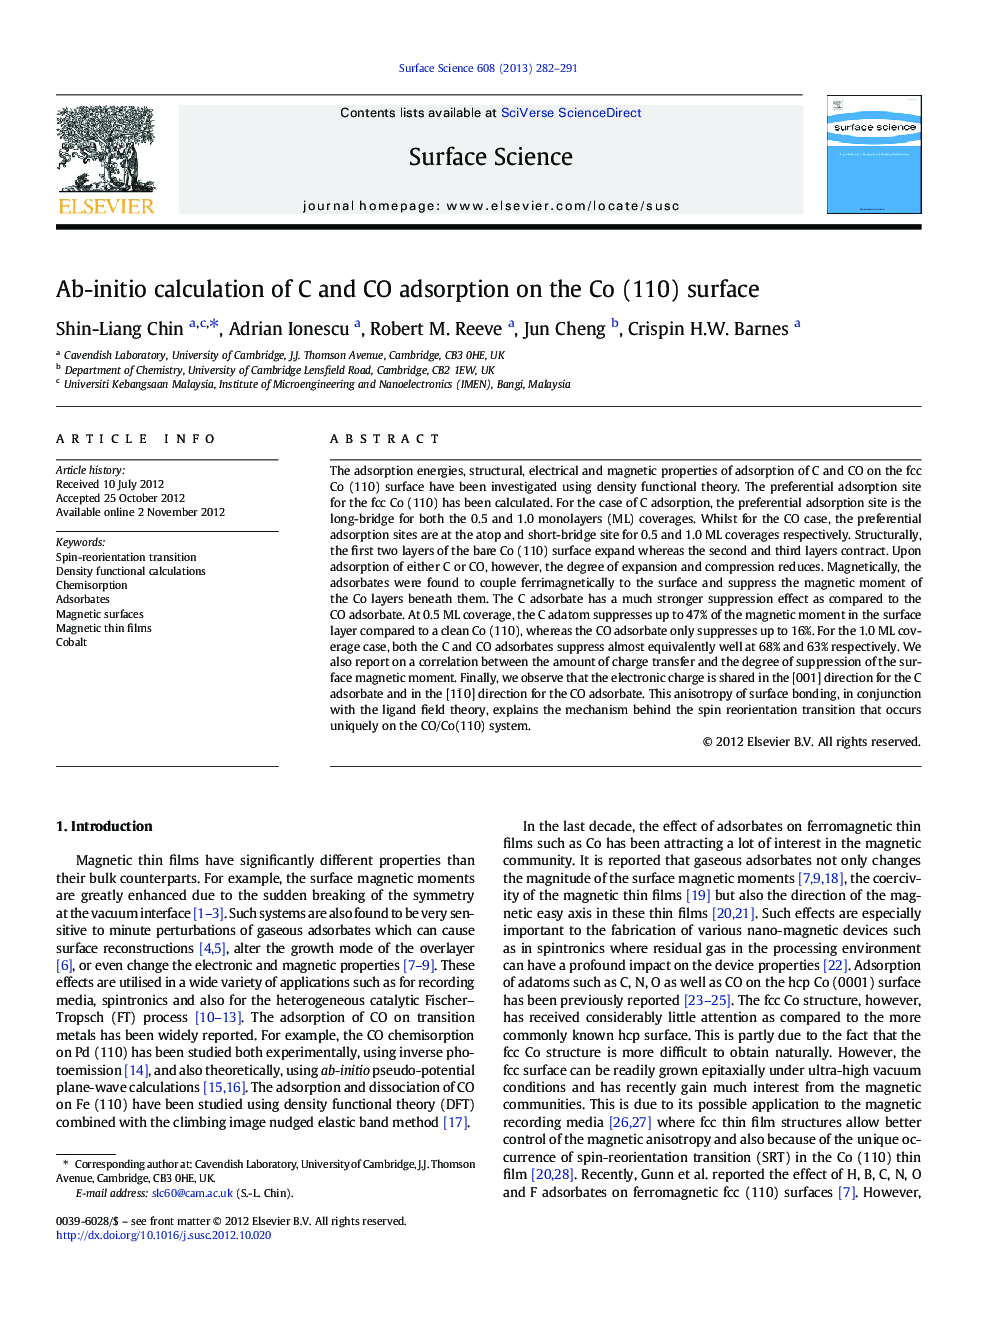 Ab-initio calculation of C and CO adsorption on the Co (110) surface